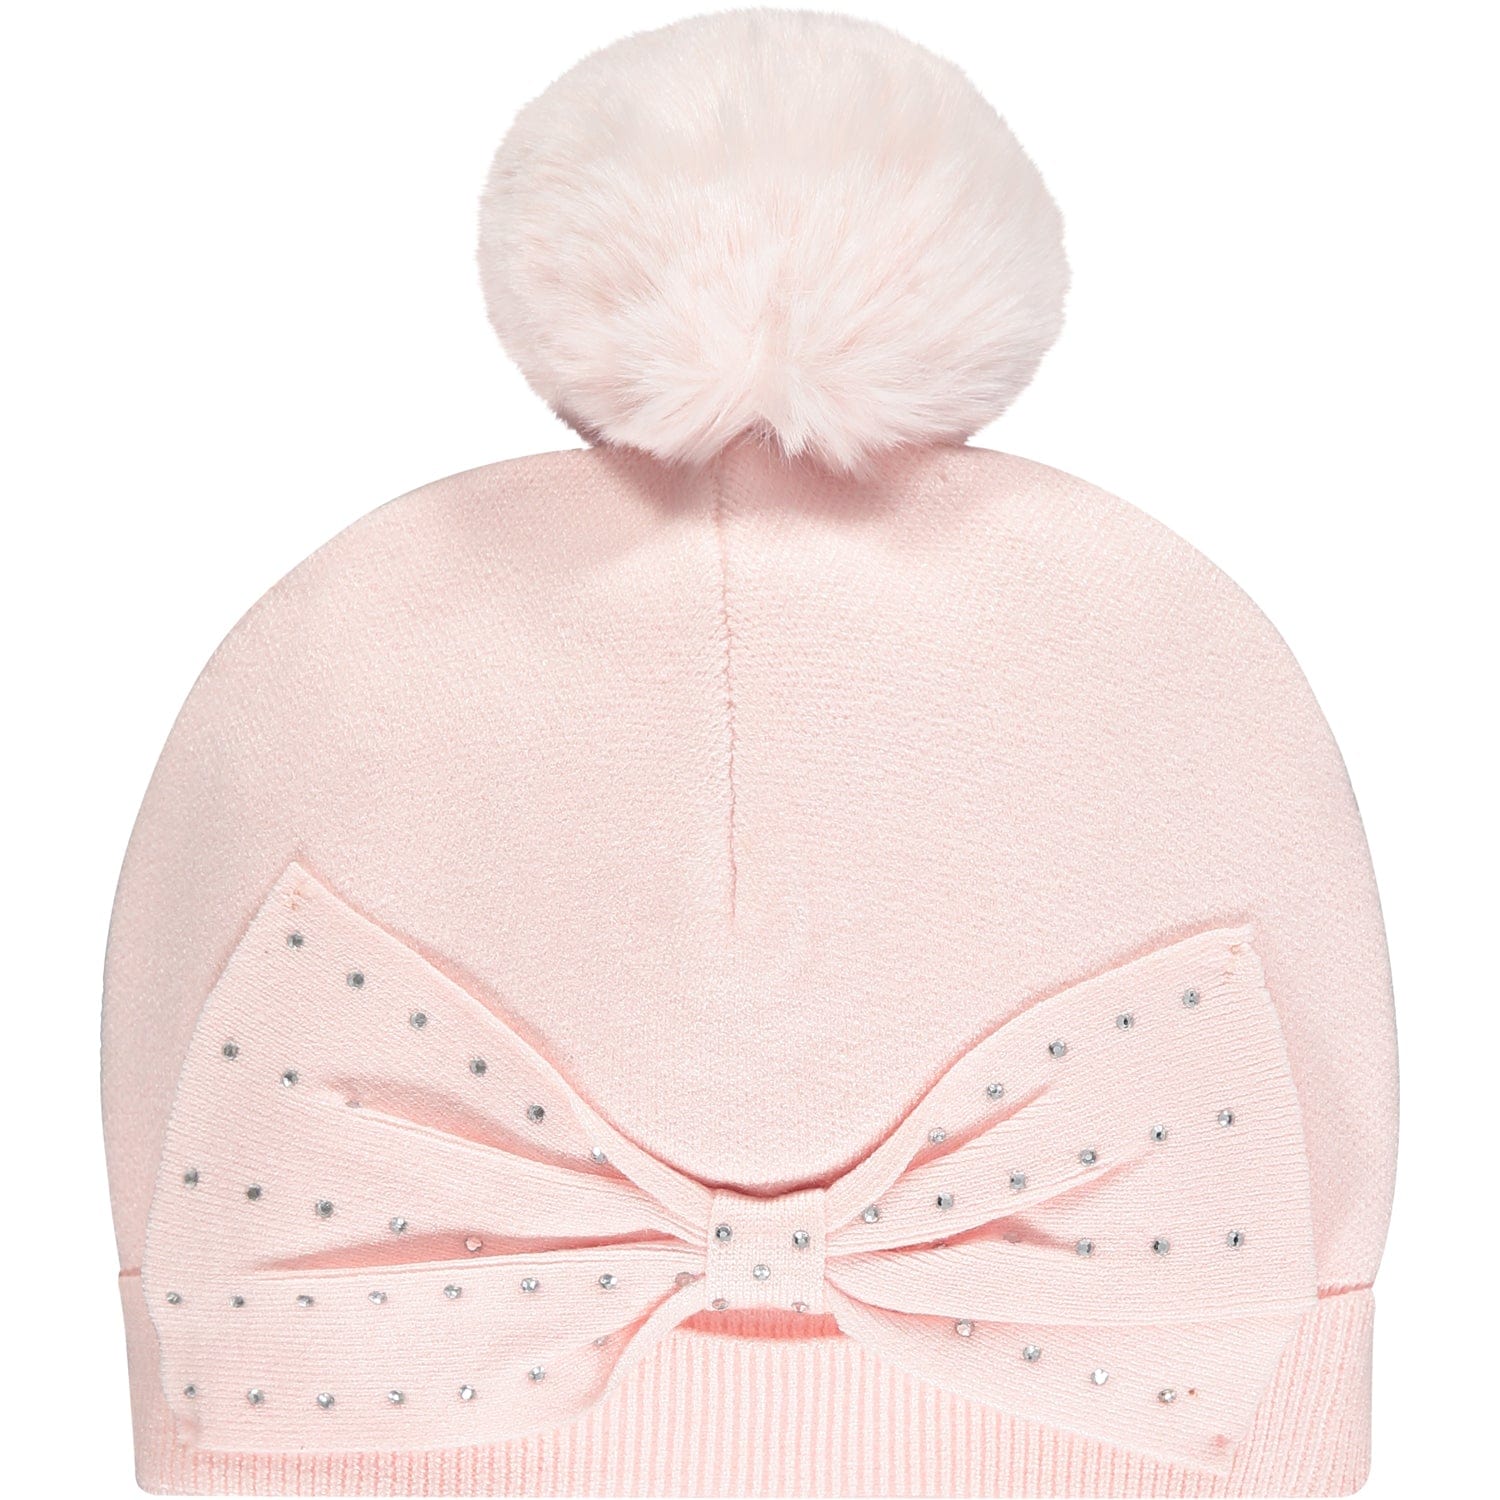 A DEE - Theodora Diamante Bow Hat - Pale Pink